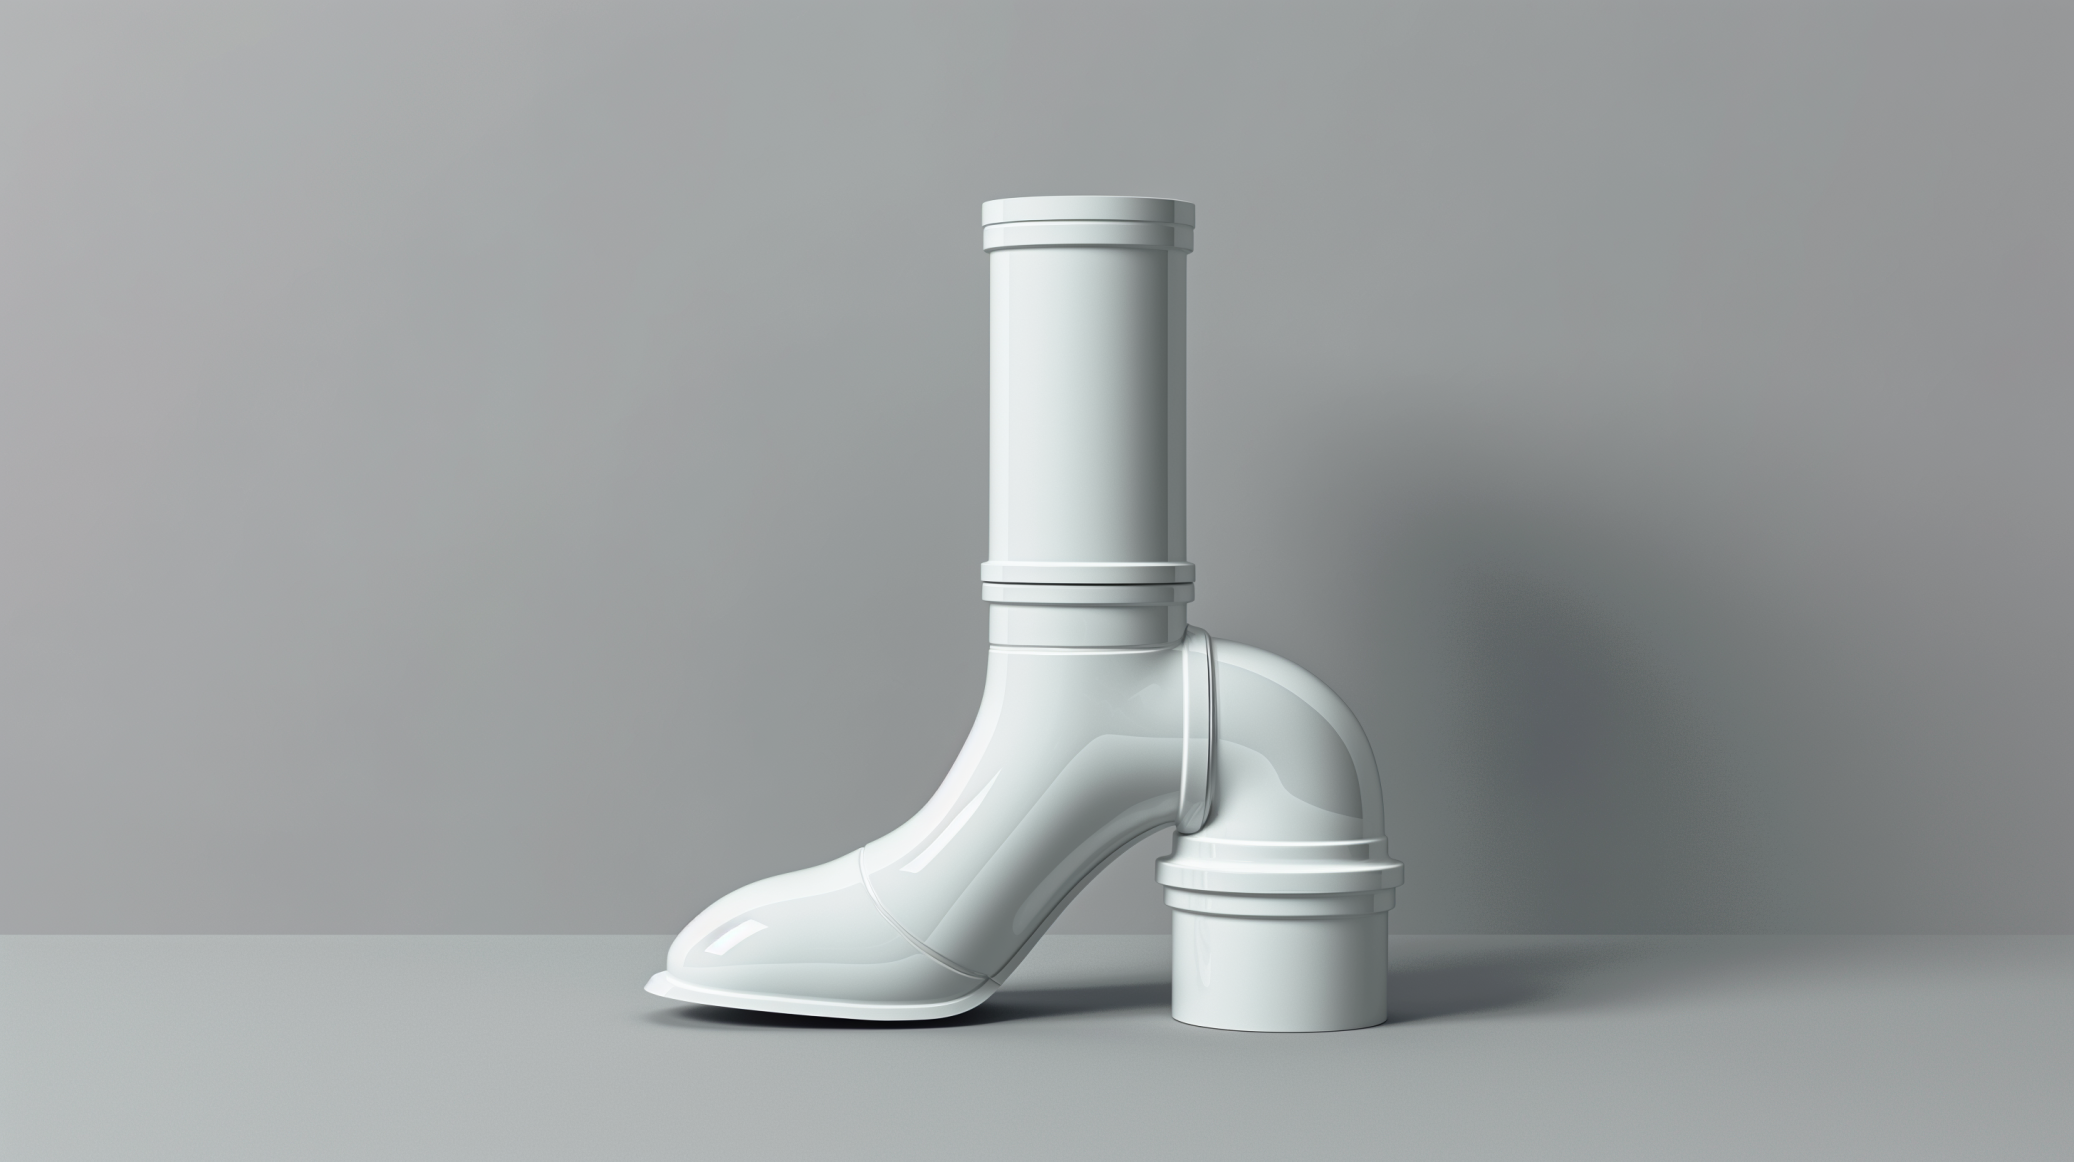 24_7ai_high_heel_boots_in_shape_of_white_pvc_plumbing_pipe_on_s_73c75859-d086-4eda-bf8f-b99e2037aac6